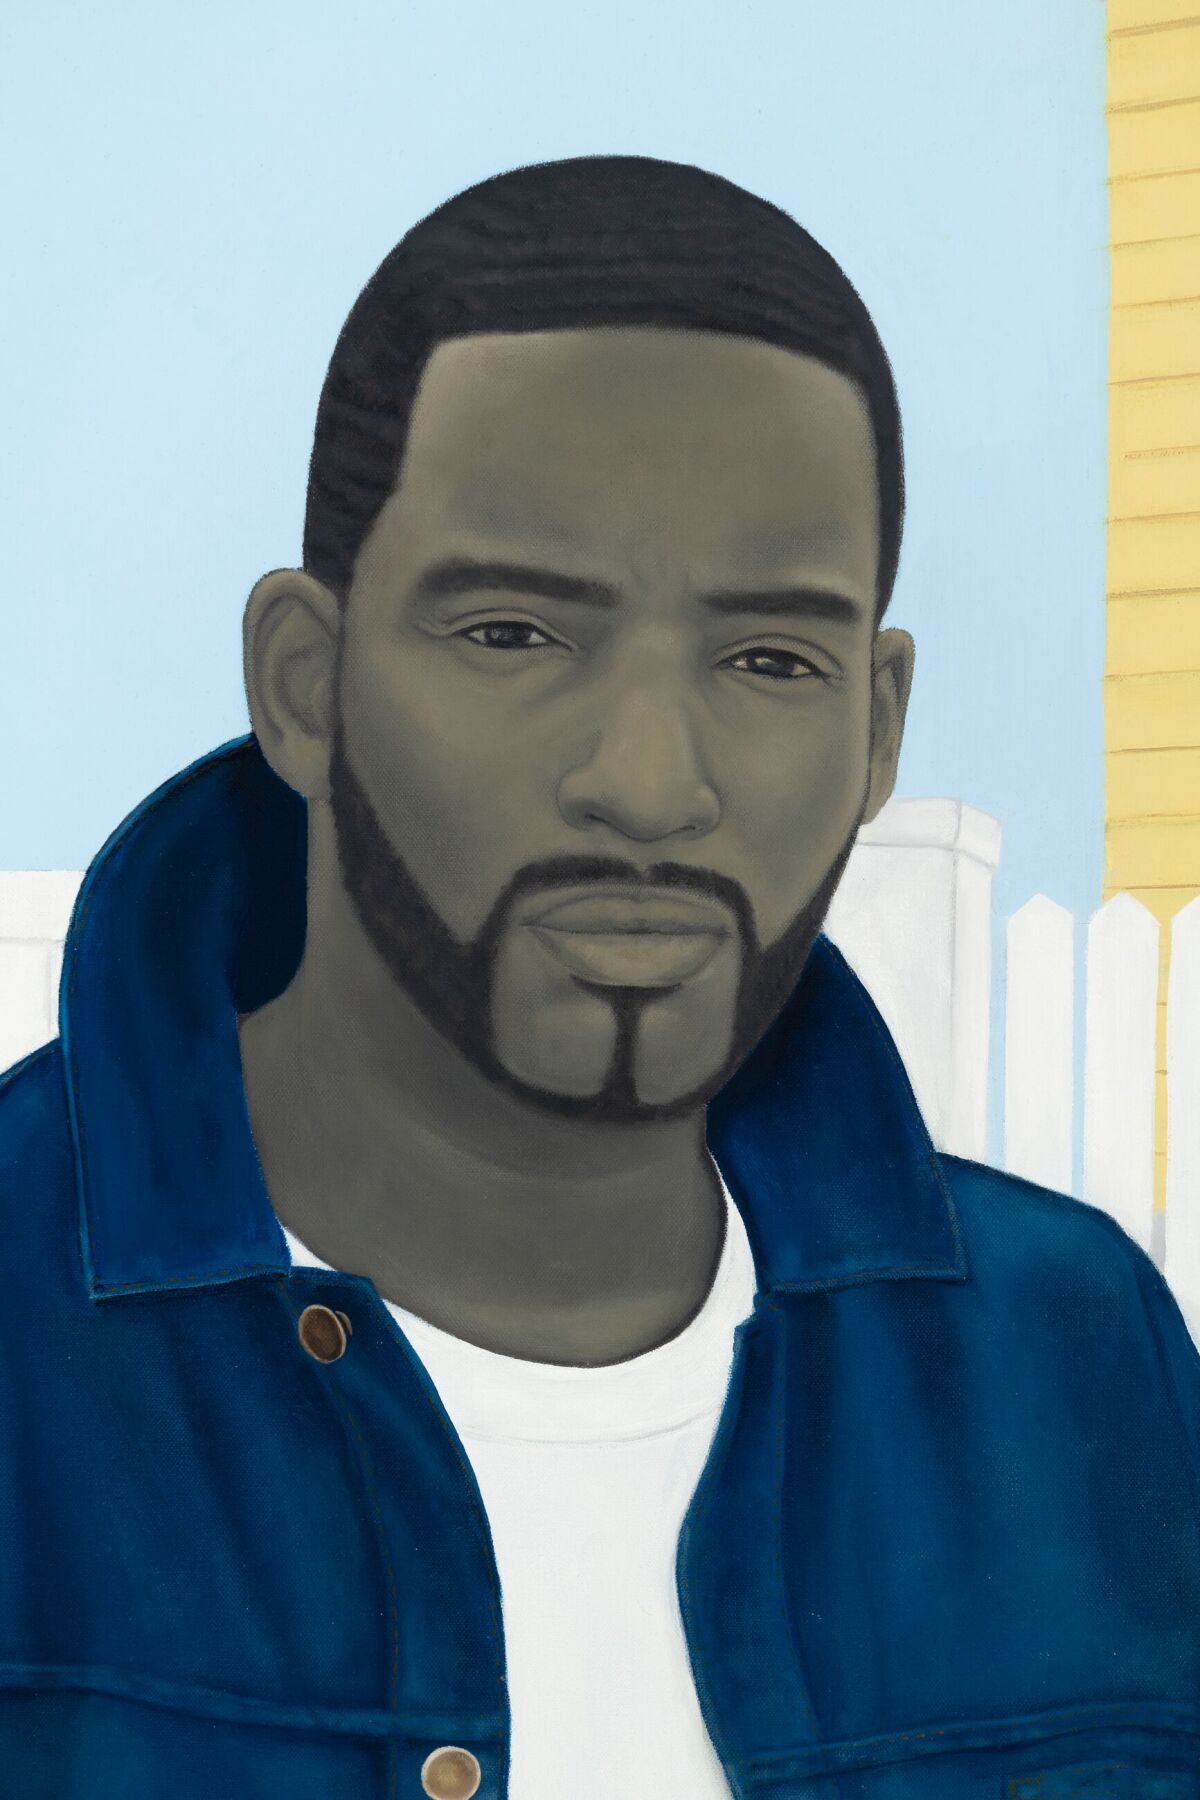 A detail from an Amy Sherald painting depicting a man, with a beard and hair waves, wearing a blue jacket and white T-shirt